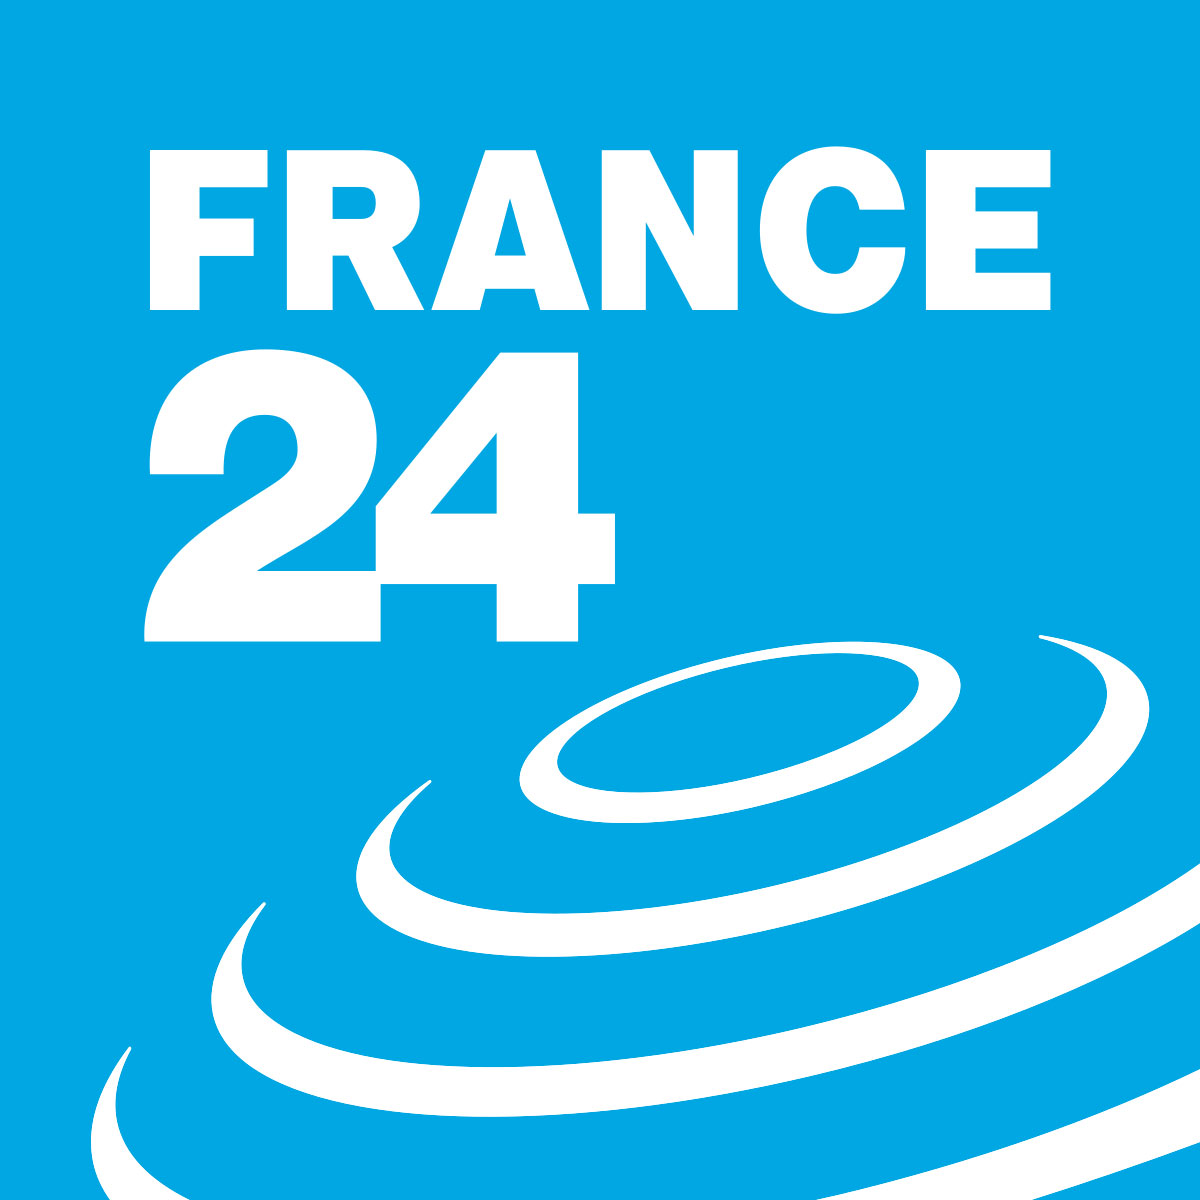 France 24 television